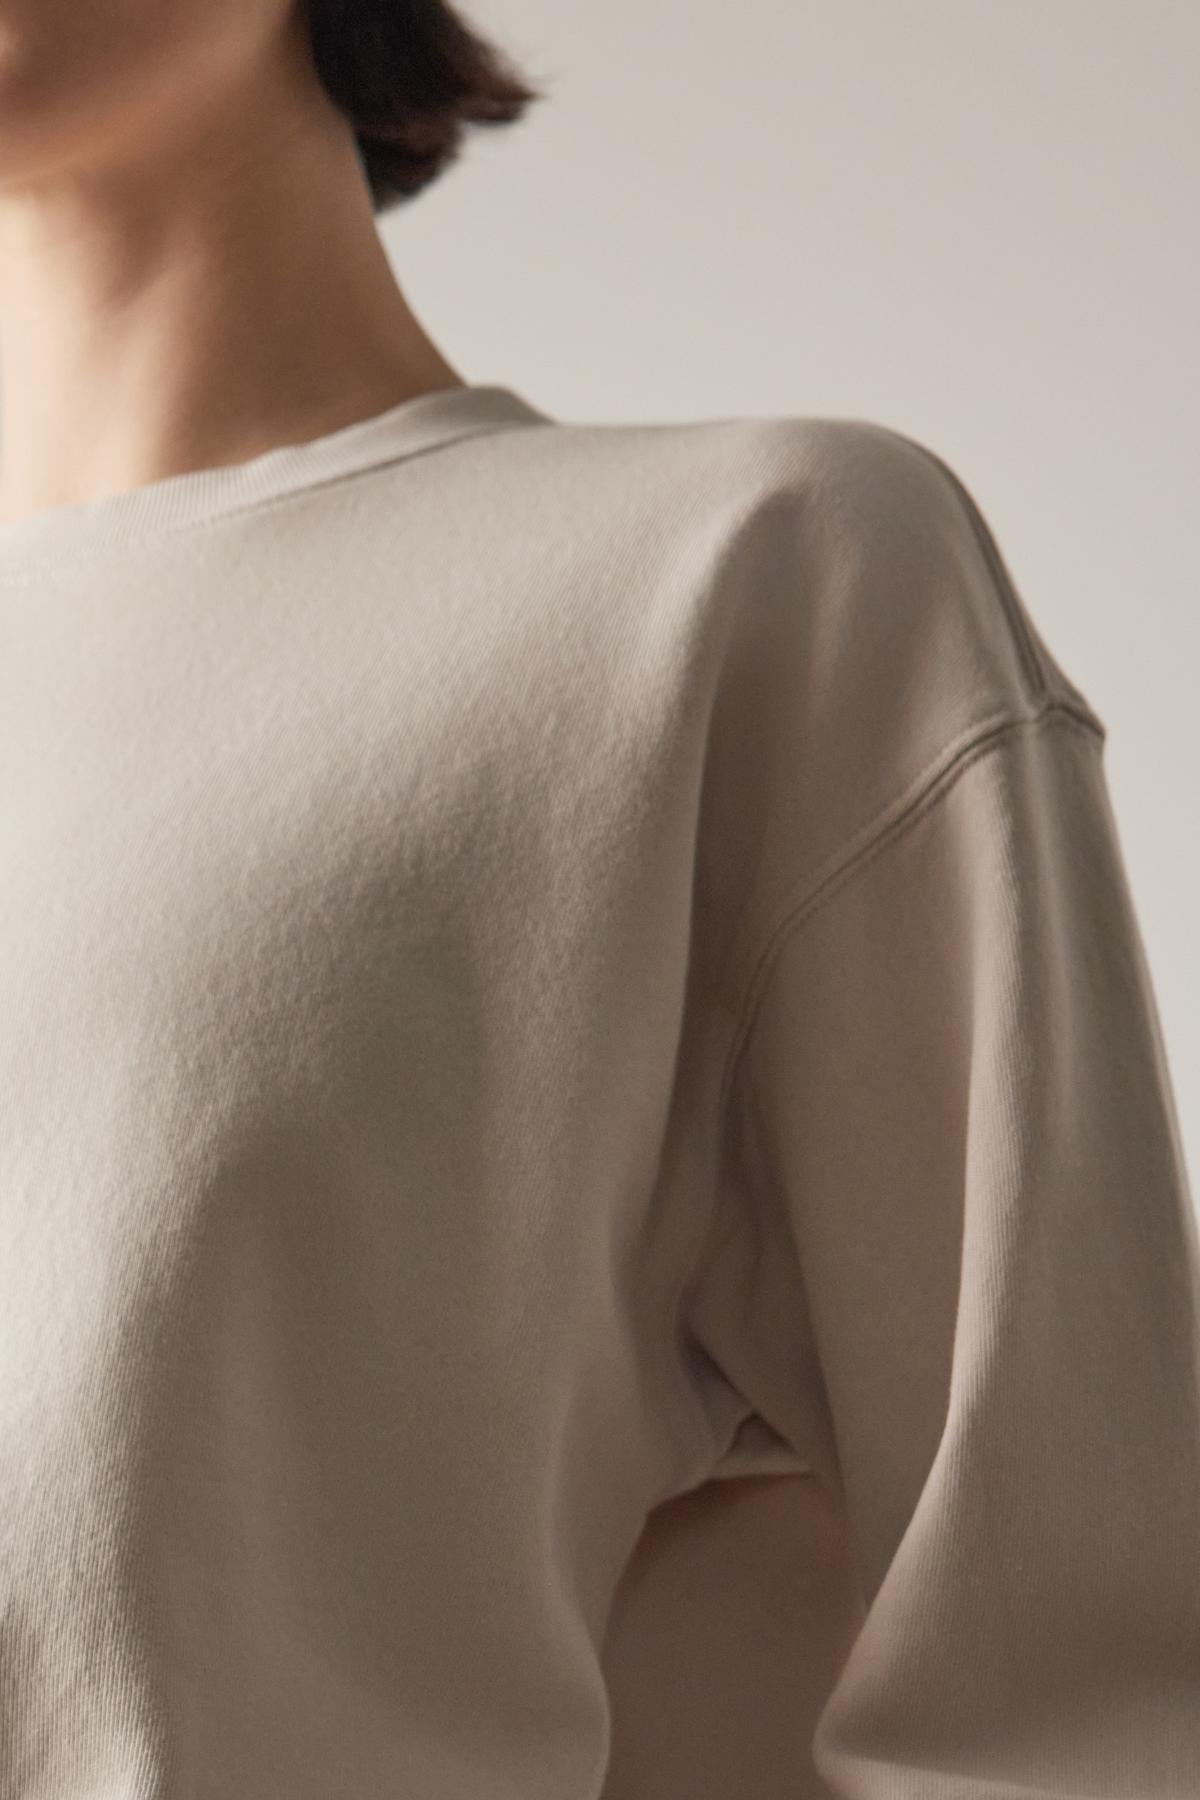   Rear view of a person wearing a Ynez Sweatshirt by Velvet by Jenny Graham, focusing on the shirt's texture and stitching details. 